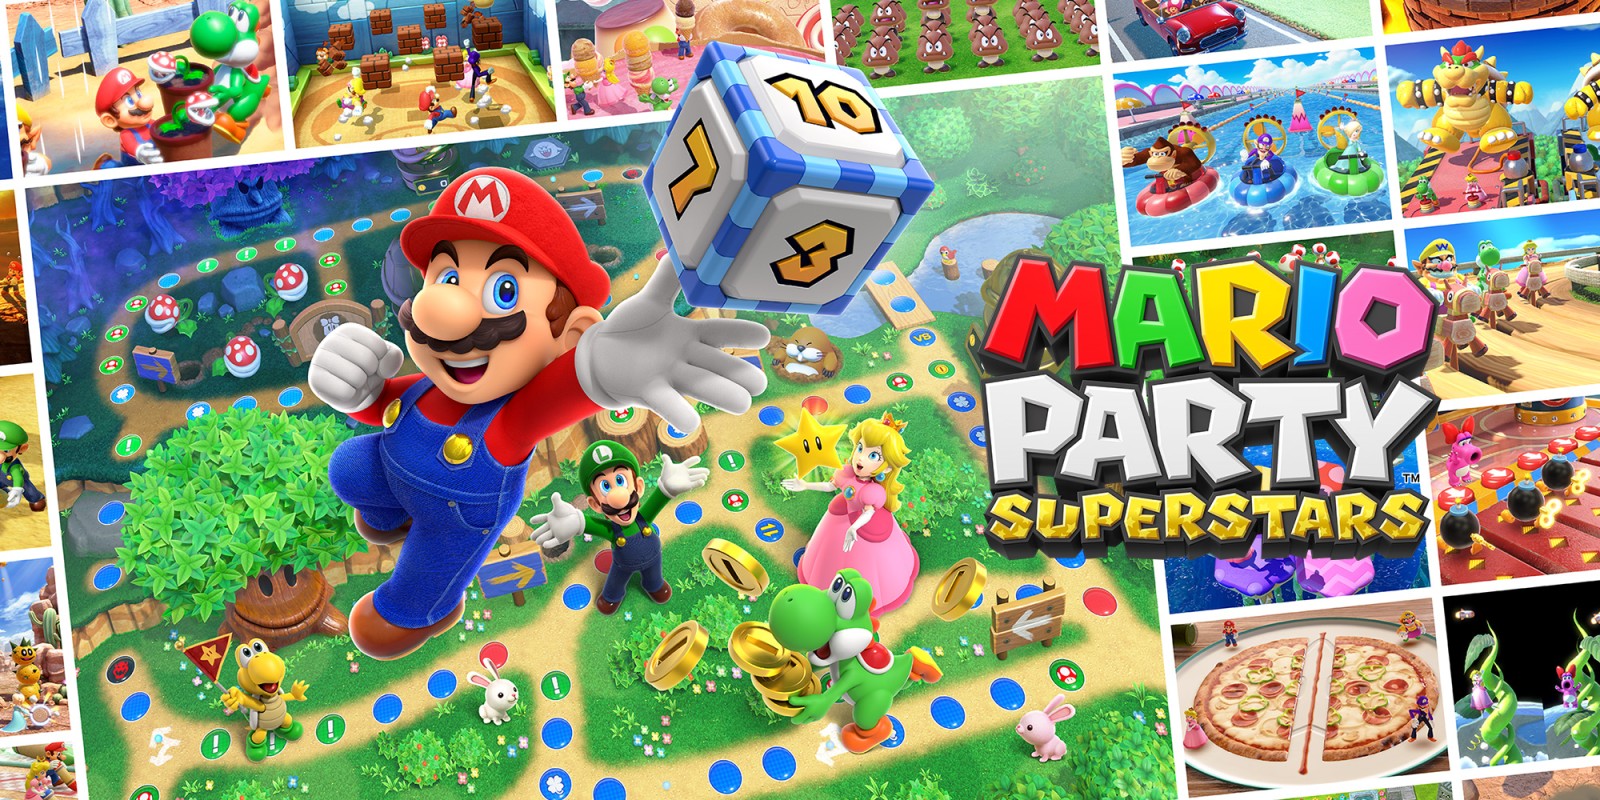 H2x1_NSwitch_MarioPartySuperStars_image1600w